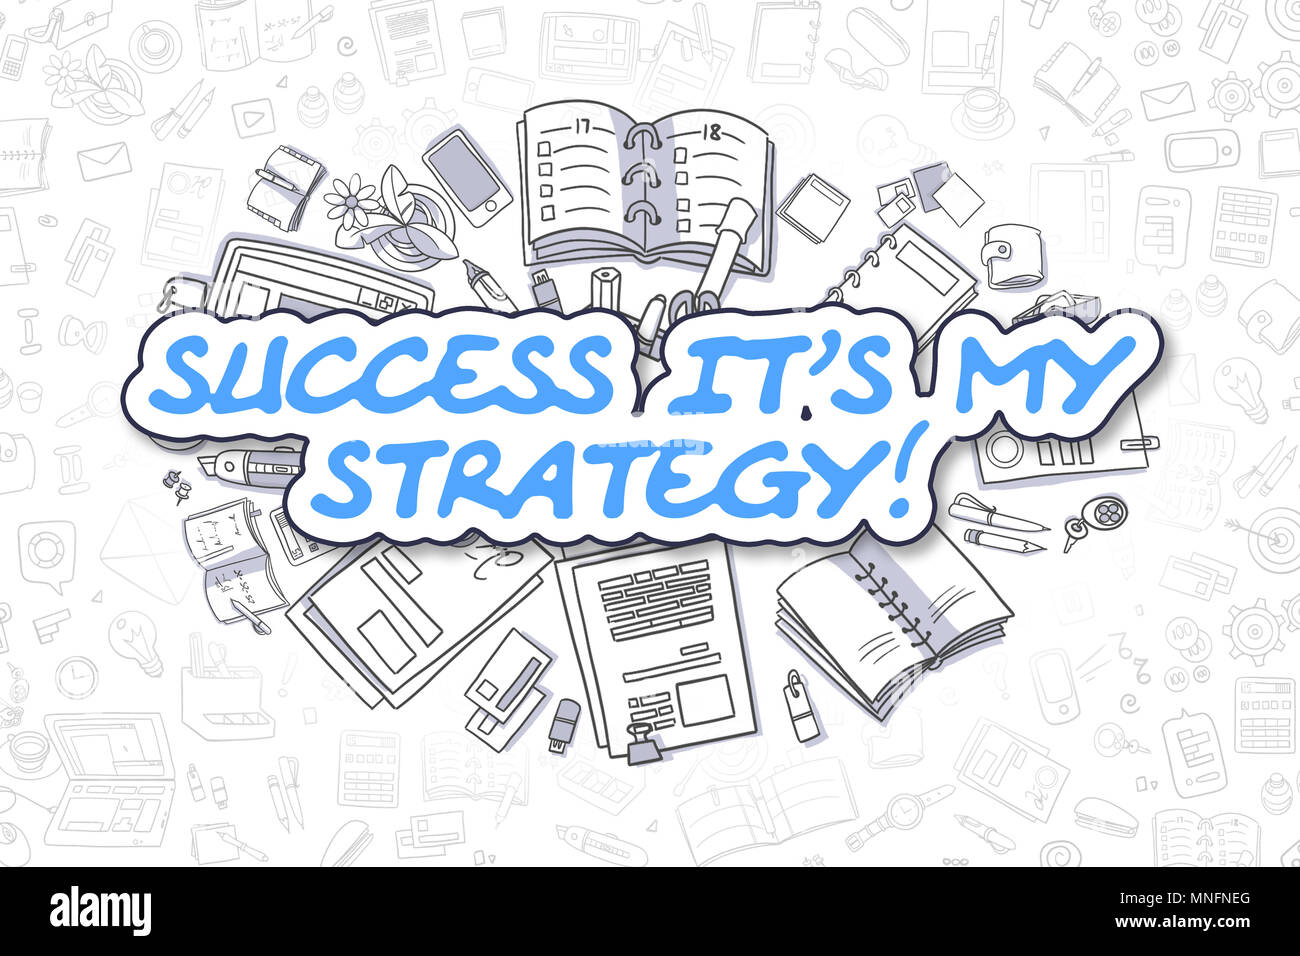 Success Its My Strategy - Business Concept. Stock Photo